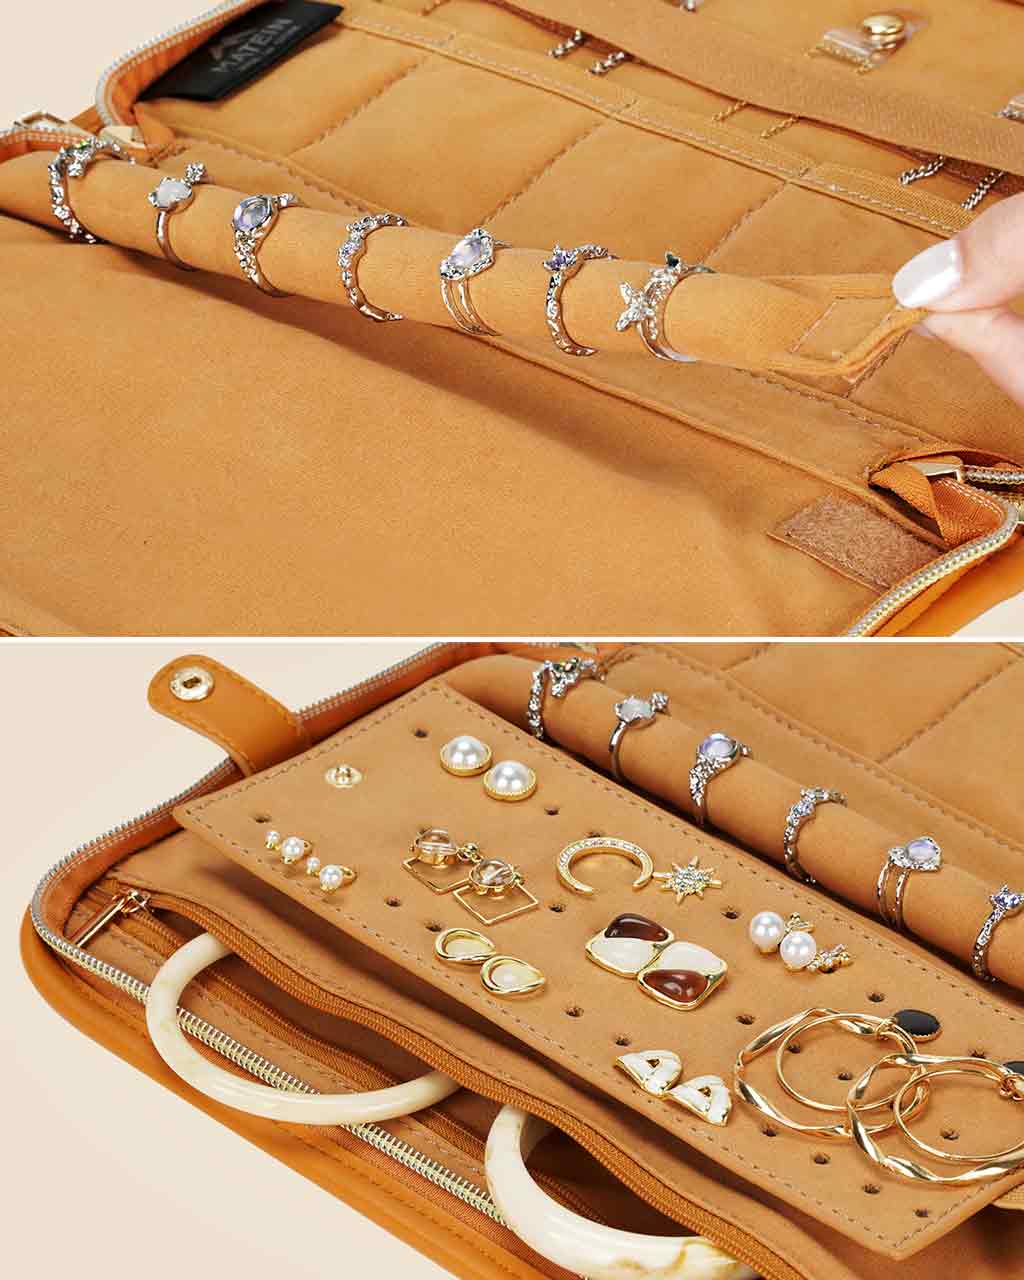 Travel Jewelry Organizer Roll with Zipper Pockets Large Hanging Jewelry Roll Bag Case for Rings, Earrings, Necklaces, Bracelets, Brooches, Waterpoof